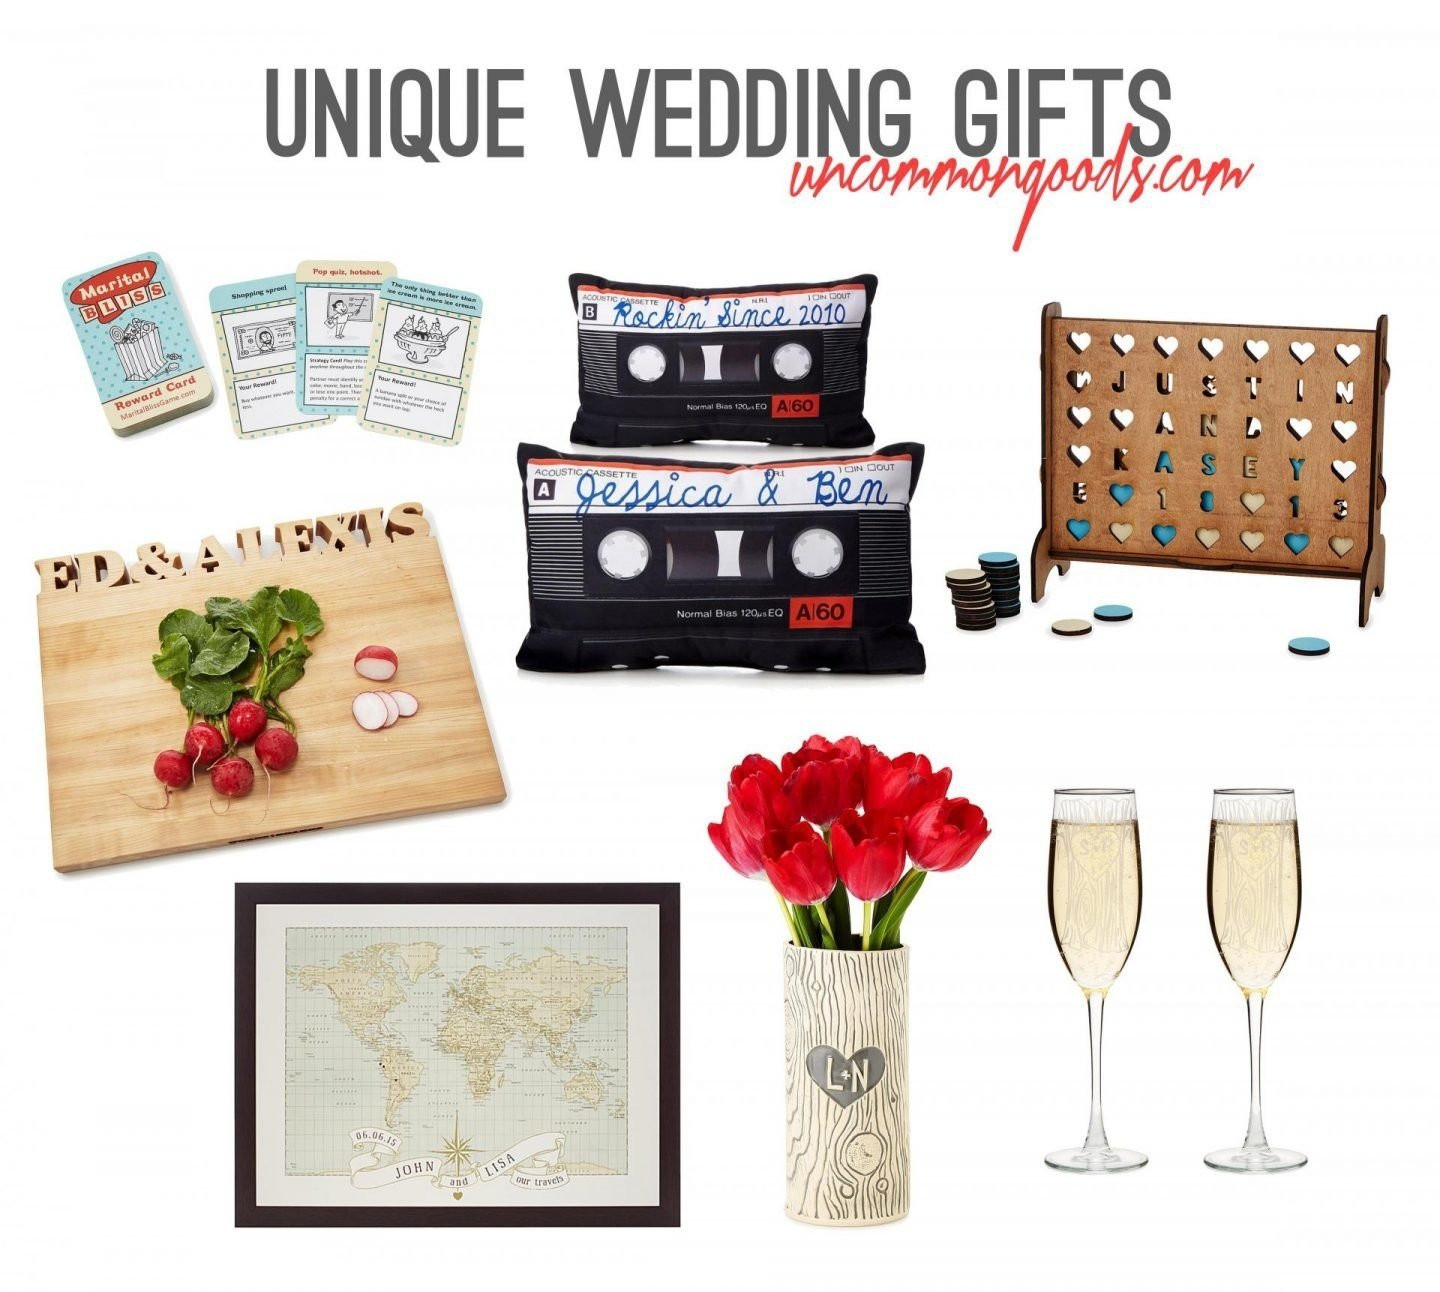 Wedding Gift Ideas For Older Couple Second Marriage
 10 Fashionable Wedding Gift Ideas For Second Marriages 2021